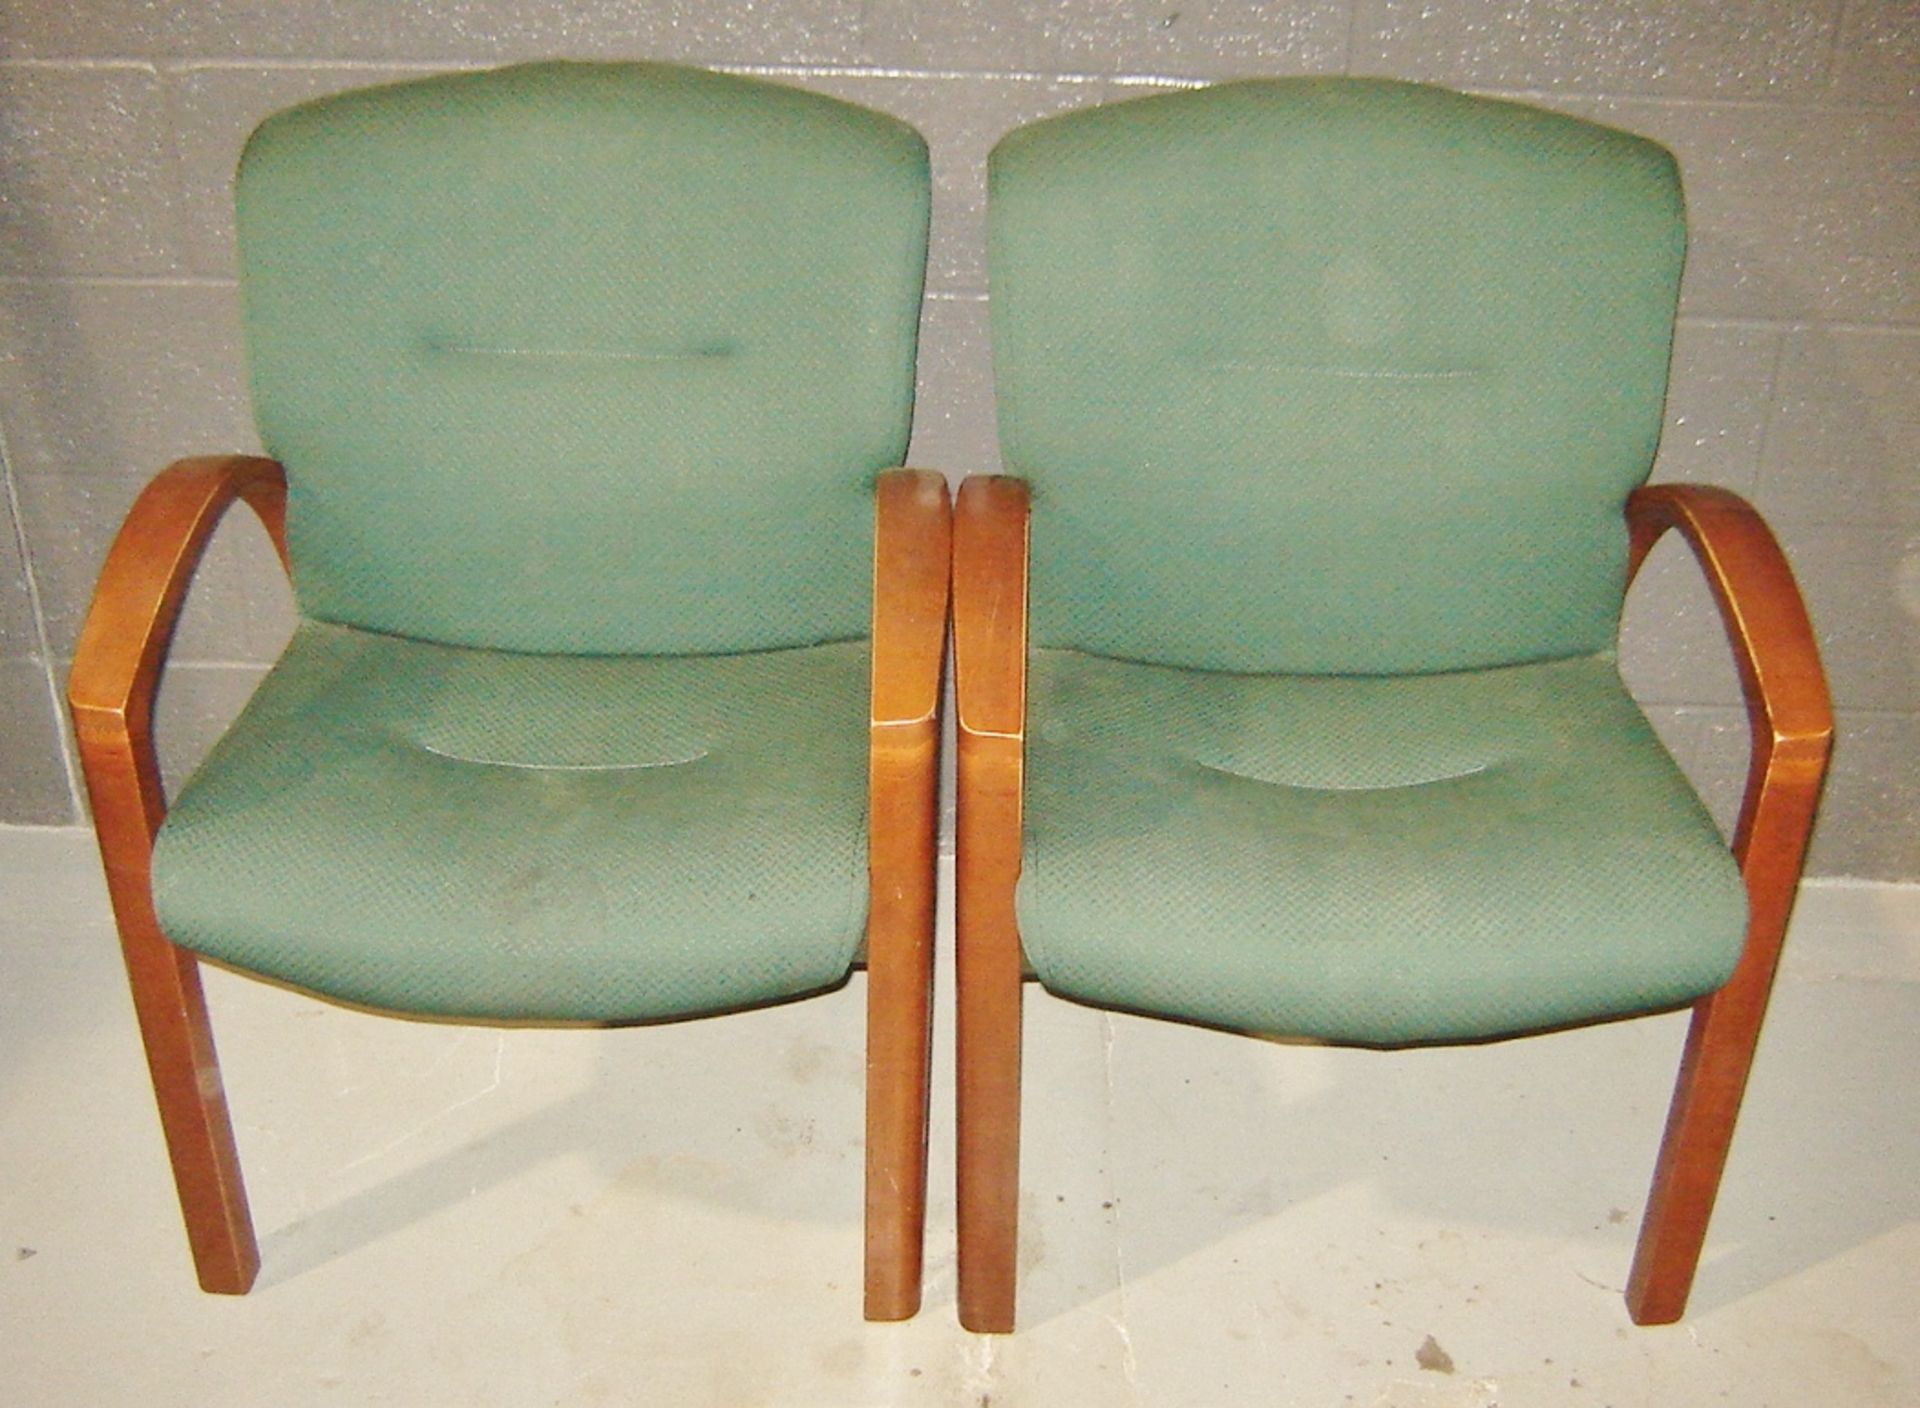 Upholstered & Wooden Frame Arm Chairs - Image 4 of 4